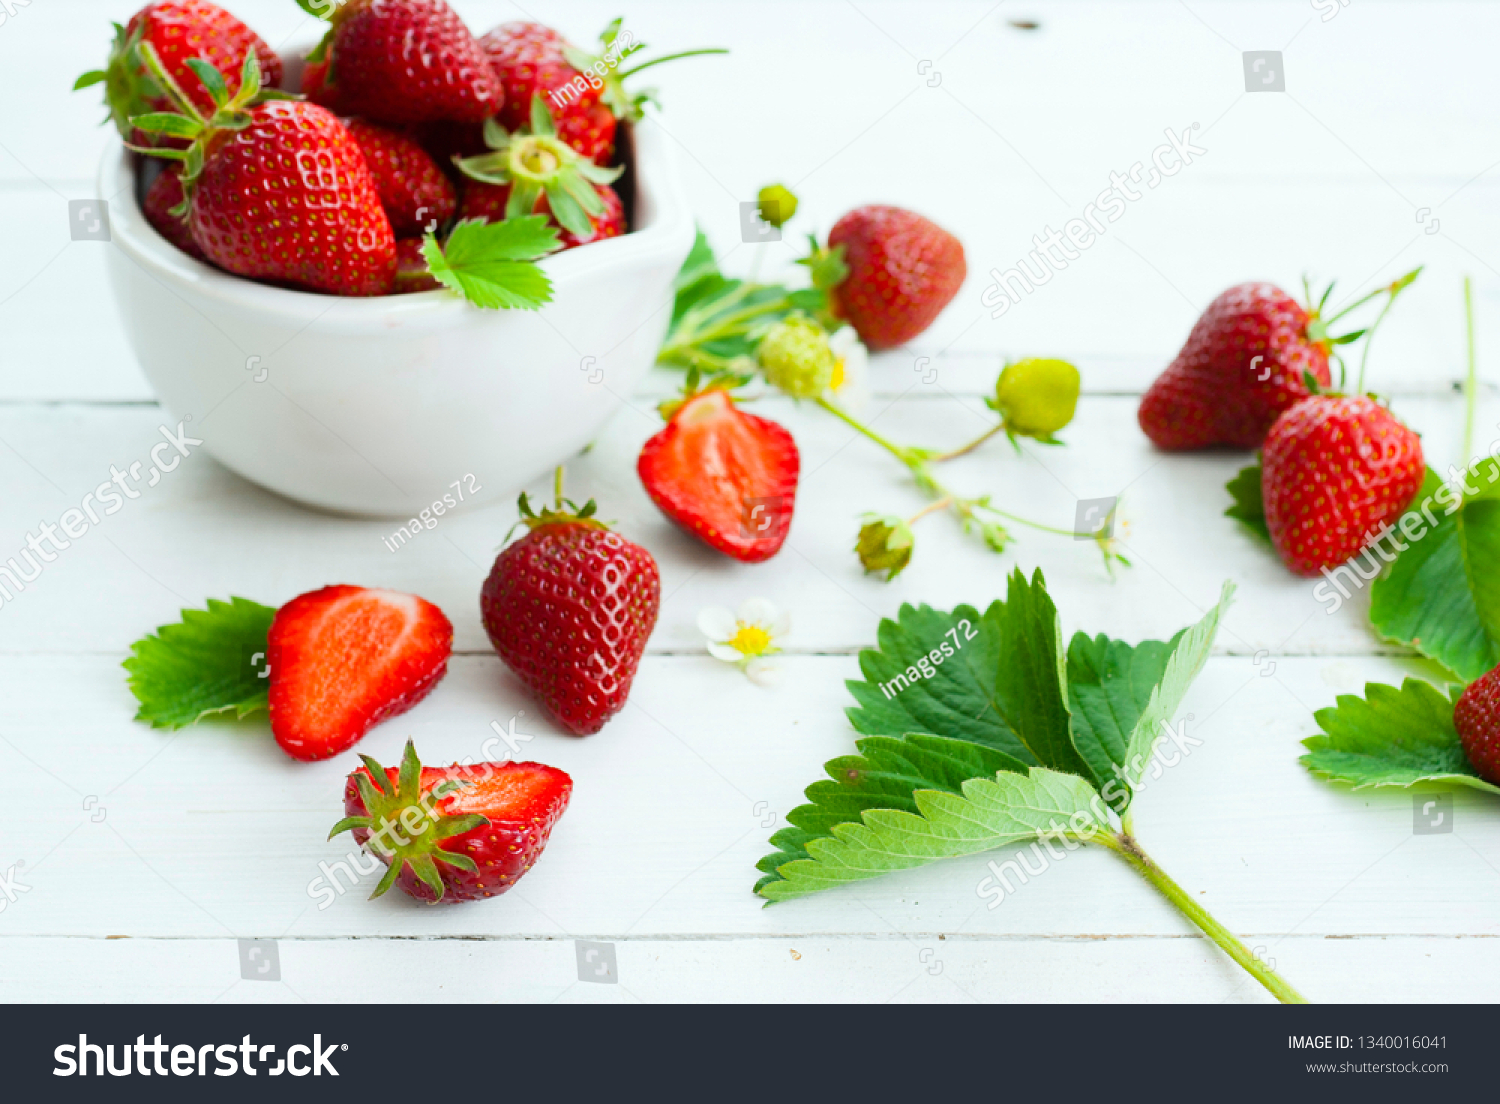 fresh ripe and under ripe strawberry fruits, flowers, leaves on white wood table background #1340016041